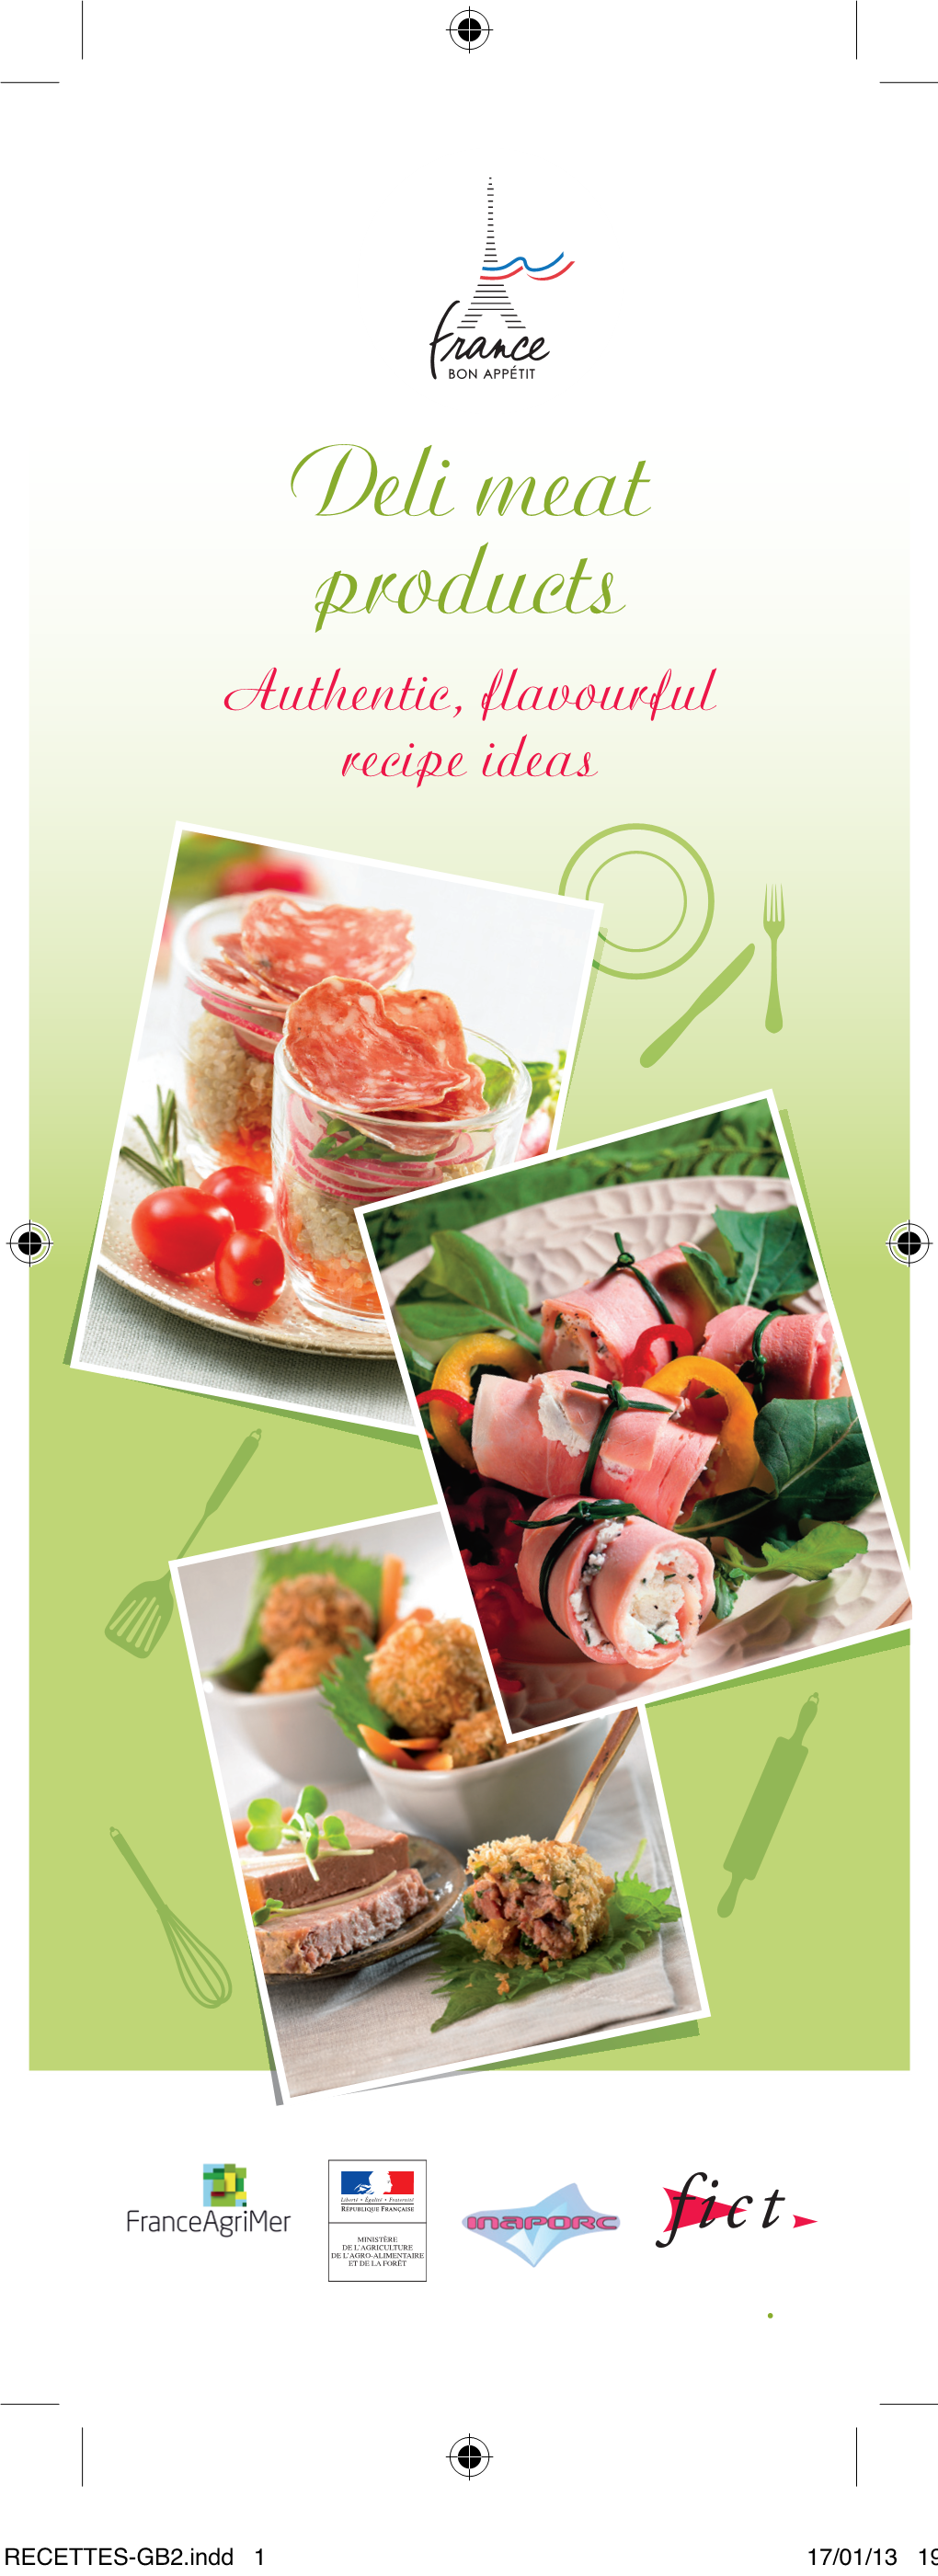 Deli Meat Products Authentic, Flavourful Recipe Ideas